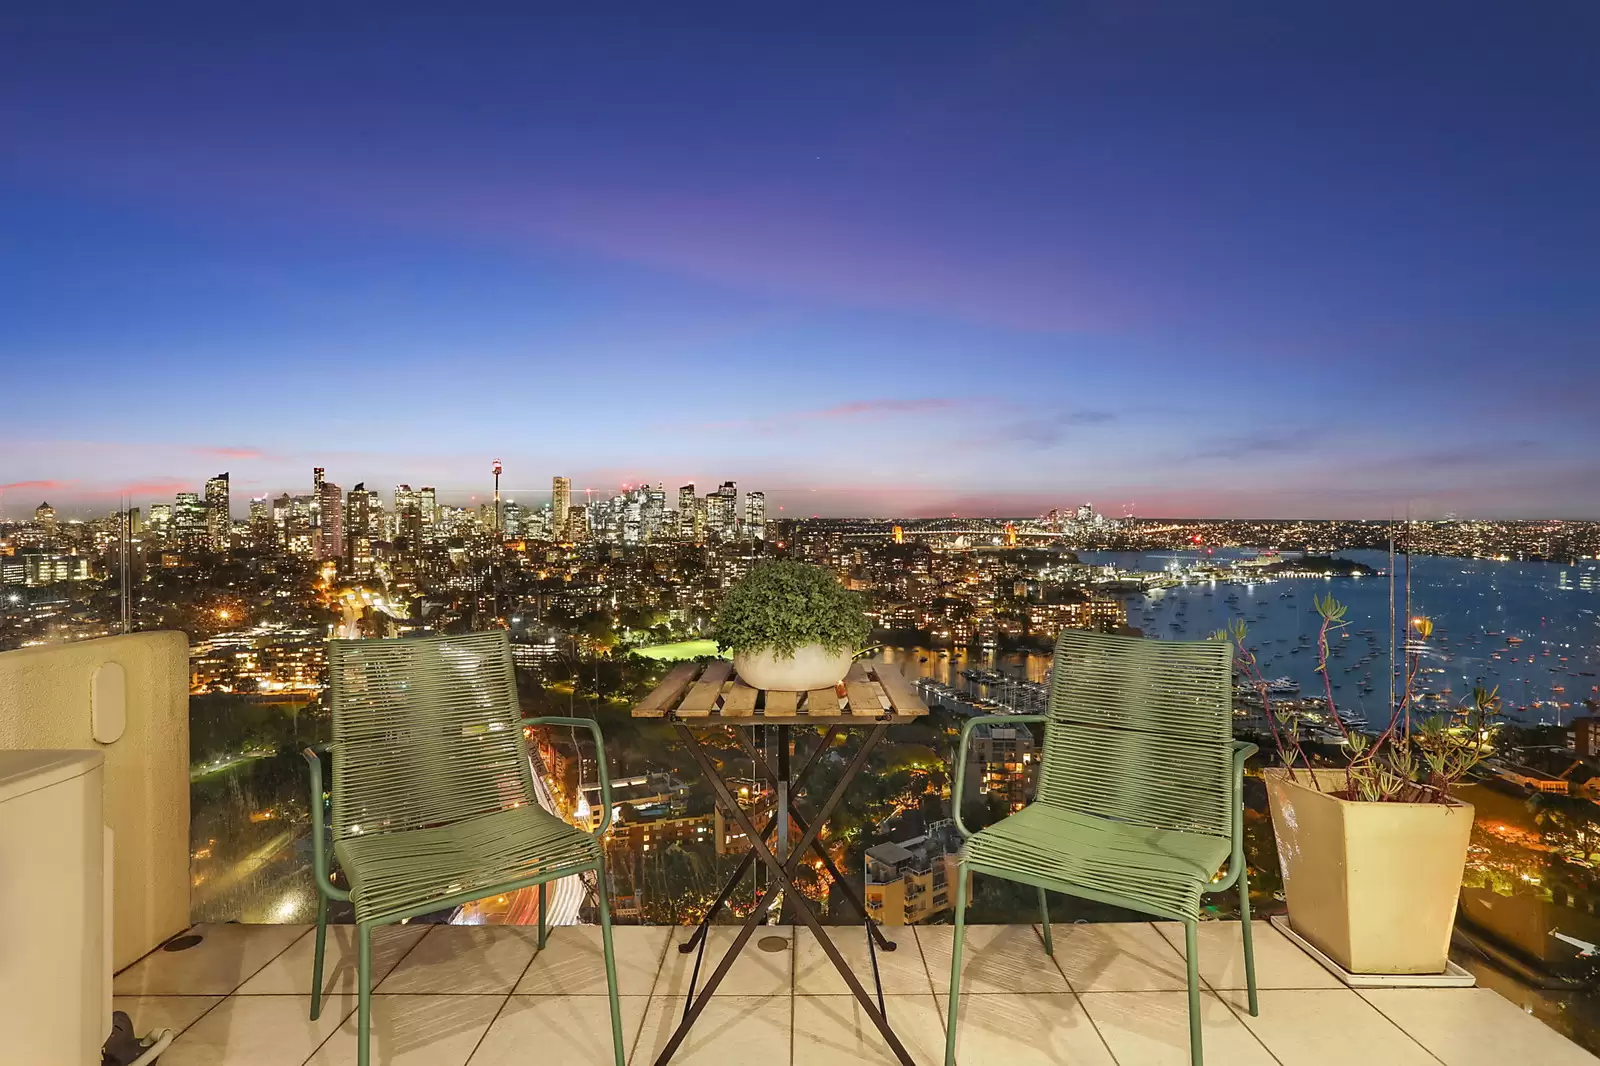 Photo #5: 27B/3 Darling Point Road, Darling Point - Sold by Sydney Sotheby's International Realty